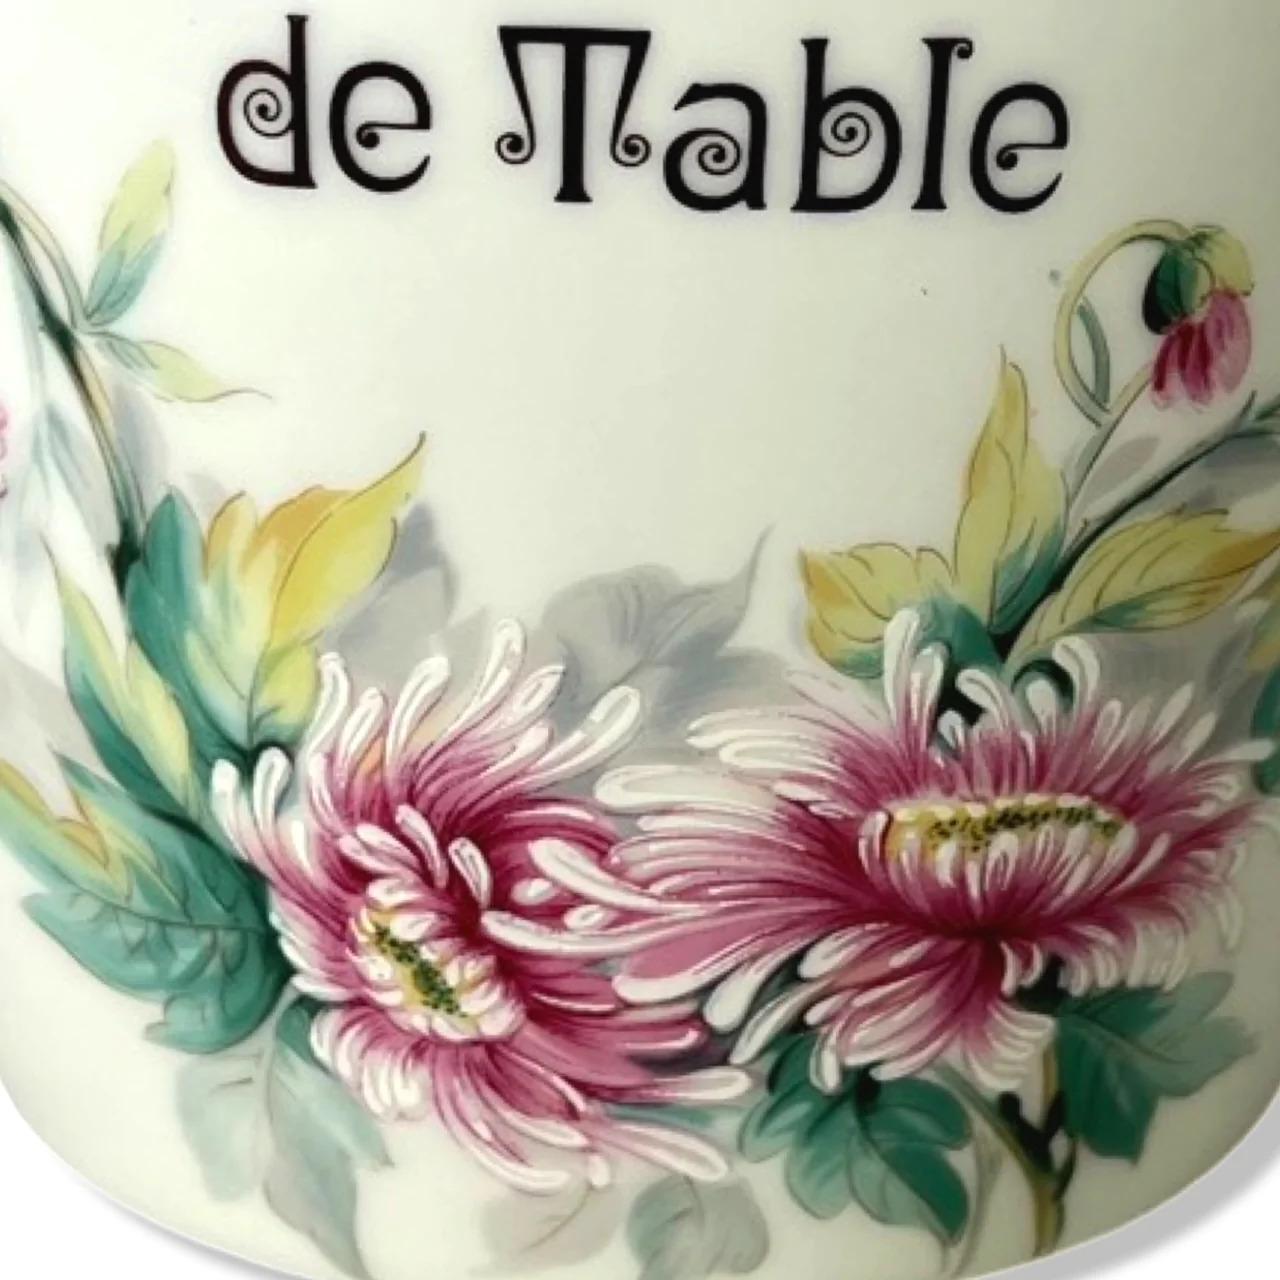 Translating in english to a literal meaning of 'Table Service', this pretty 'Desserte de Table' Porcelain Canister, remains in impeccable antique condition and would be suitable for an avid French porcelain collector. This piece would also look